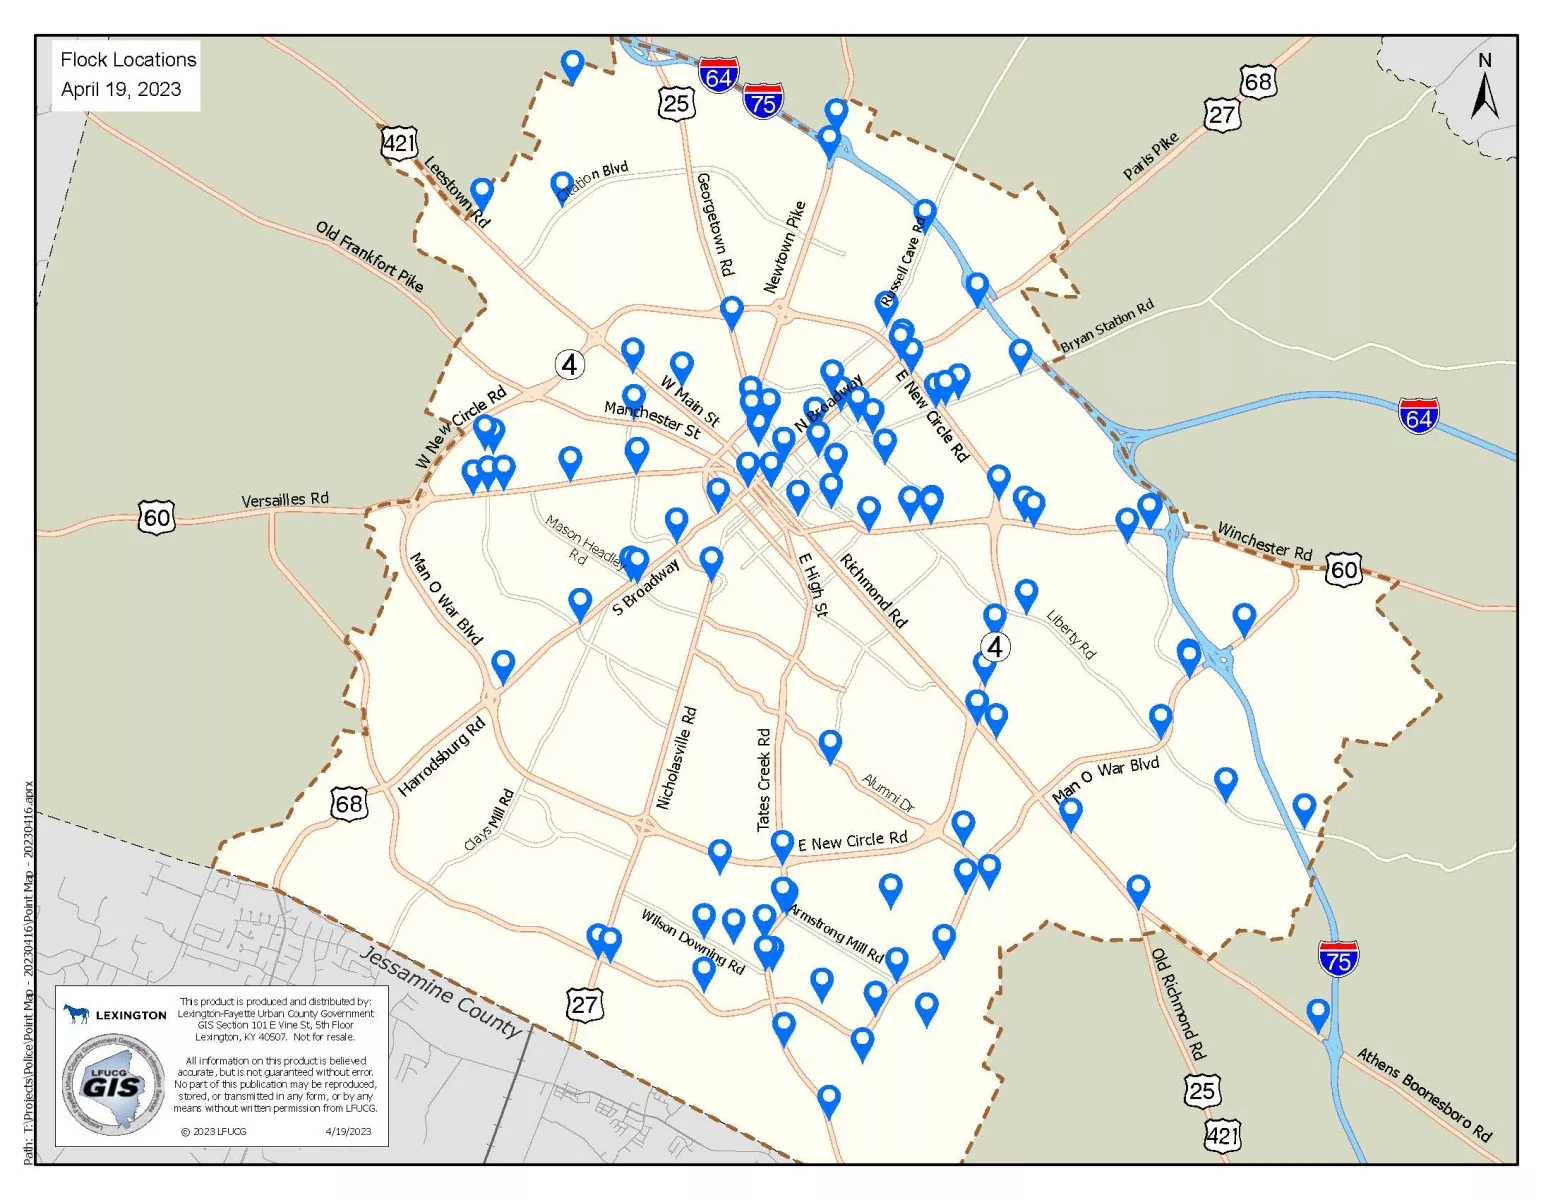 LPD releases a map of Flock camera locations